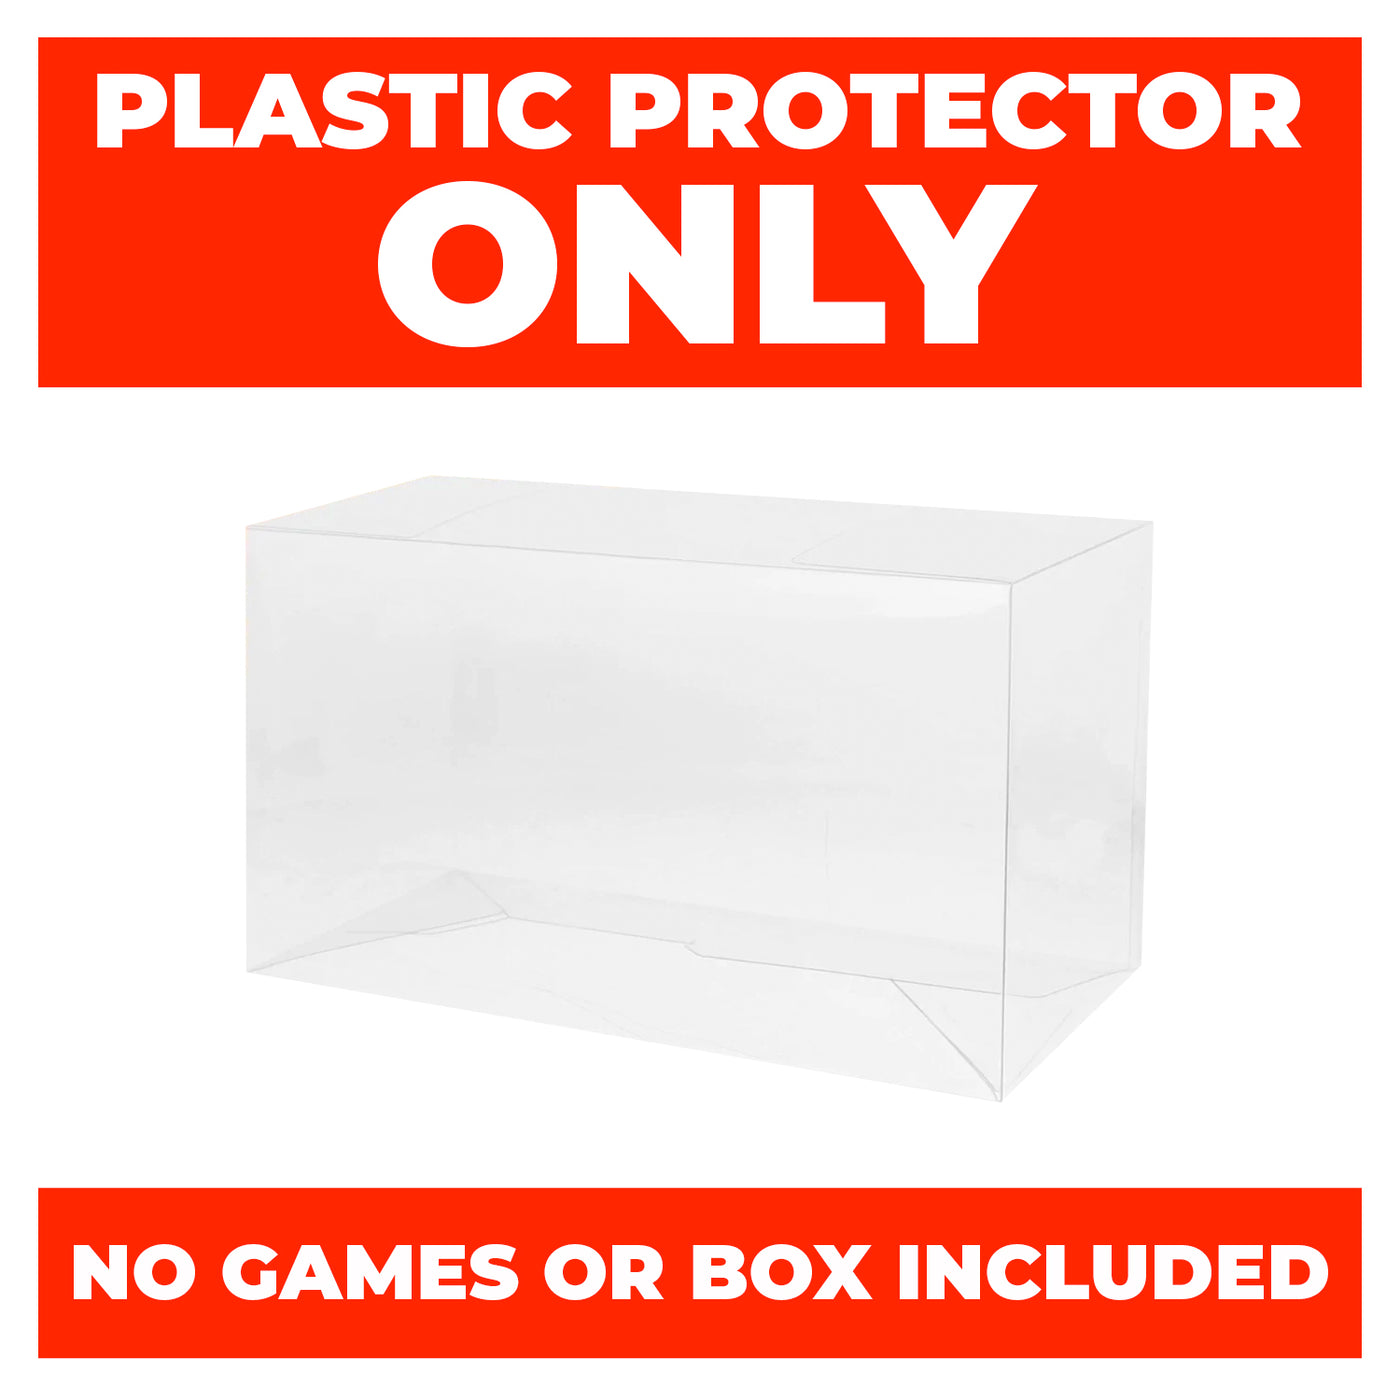 VHS Case Protectors, Standard Size (0.50mm thick, UV & Scratch Resistant)